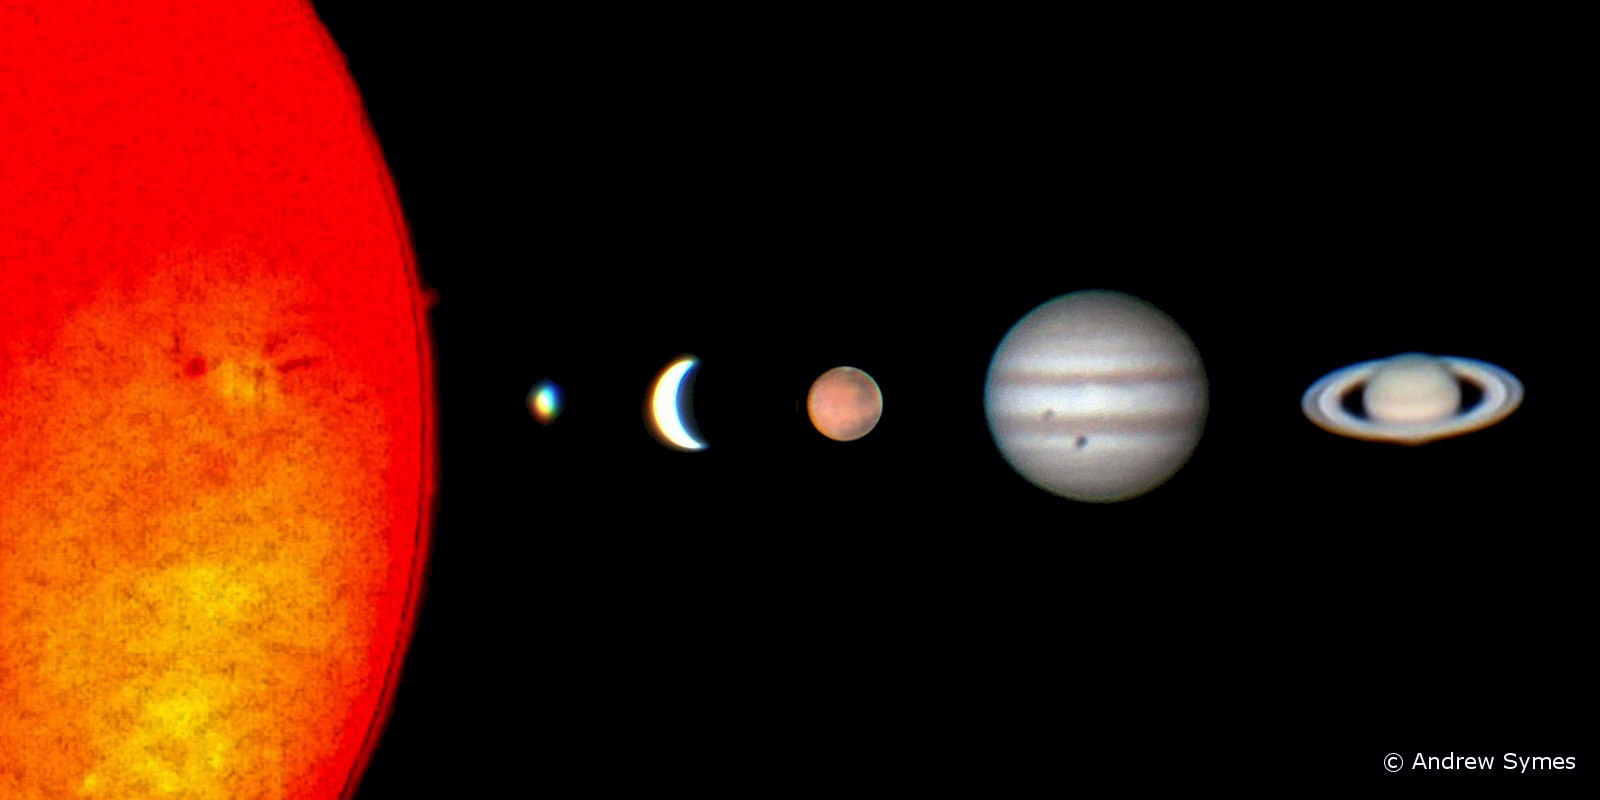 See 5 Bright Planets in Night Sky—First Time in 8 Years